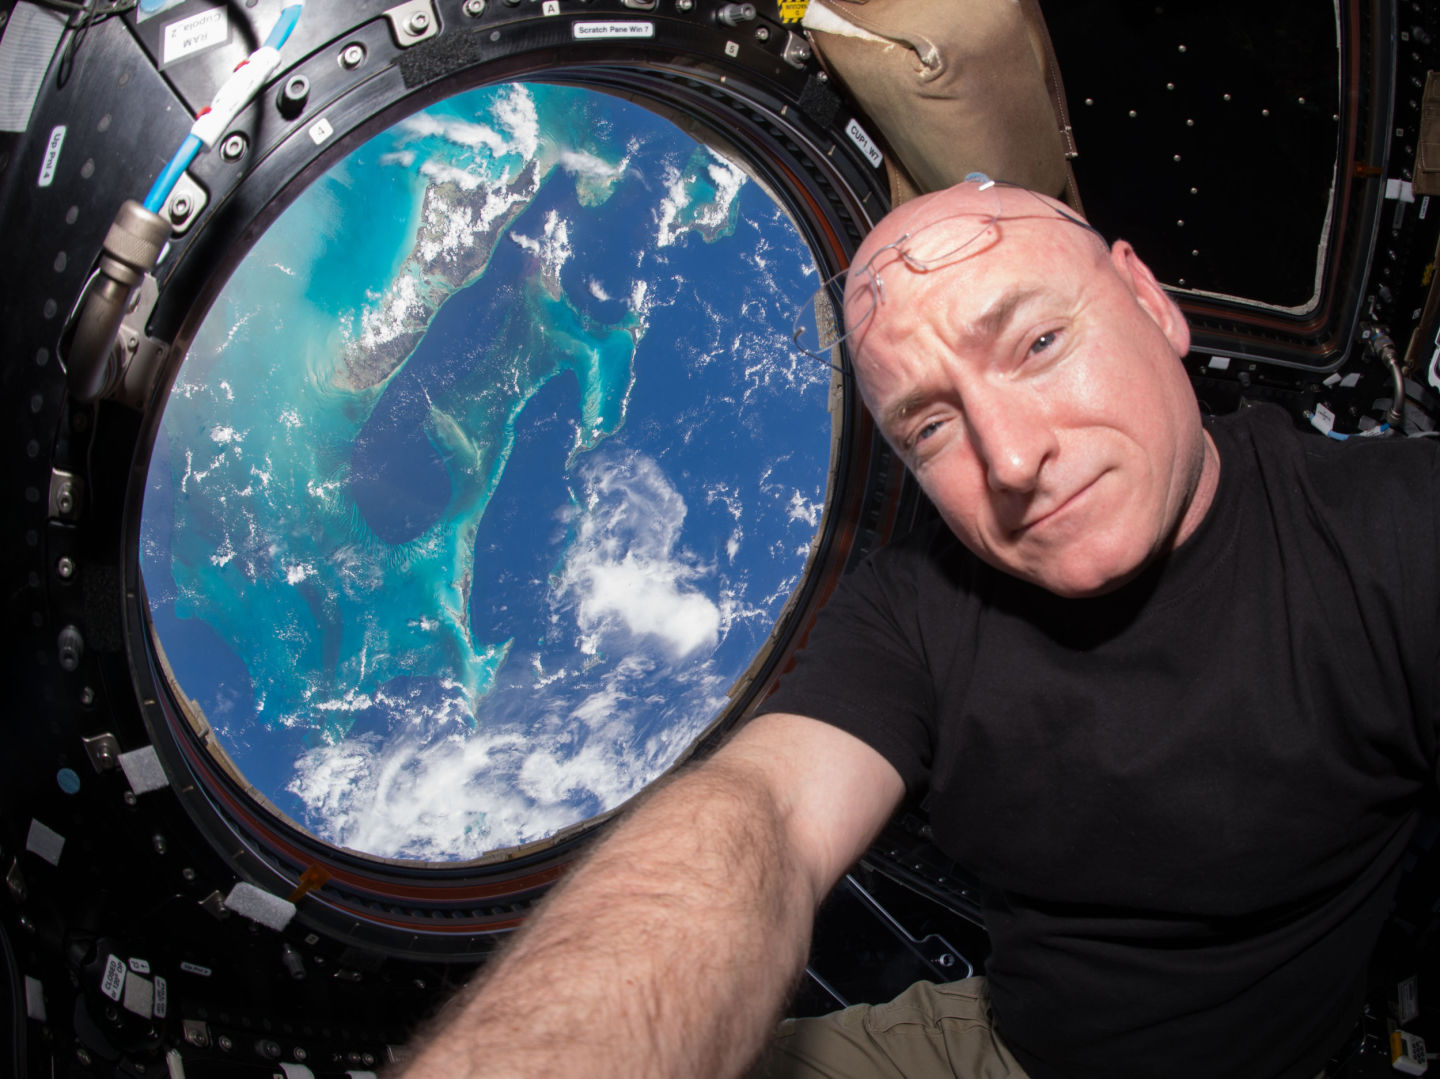 NASA astronaut Scott Kelly takes a selfie inside the cupola, a special module that provides a 360-degree view of Earth. Kelly and Russian cosmonaut Mikhail Kornienko have spent nearly a year aboard the International Space Station. NASA